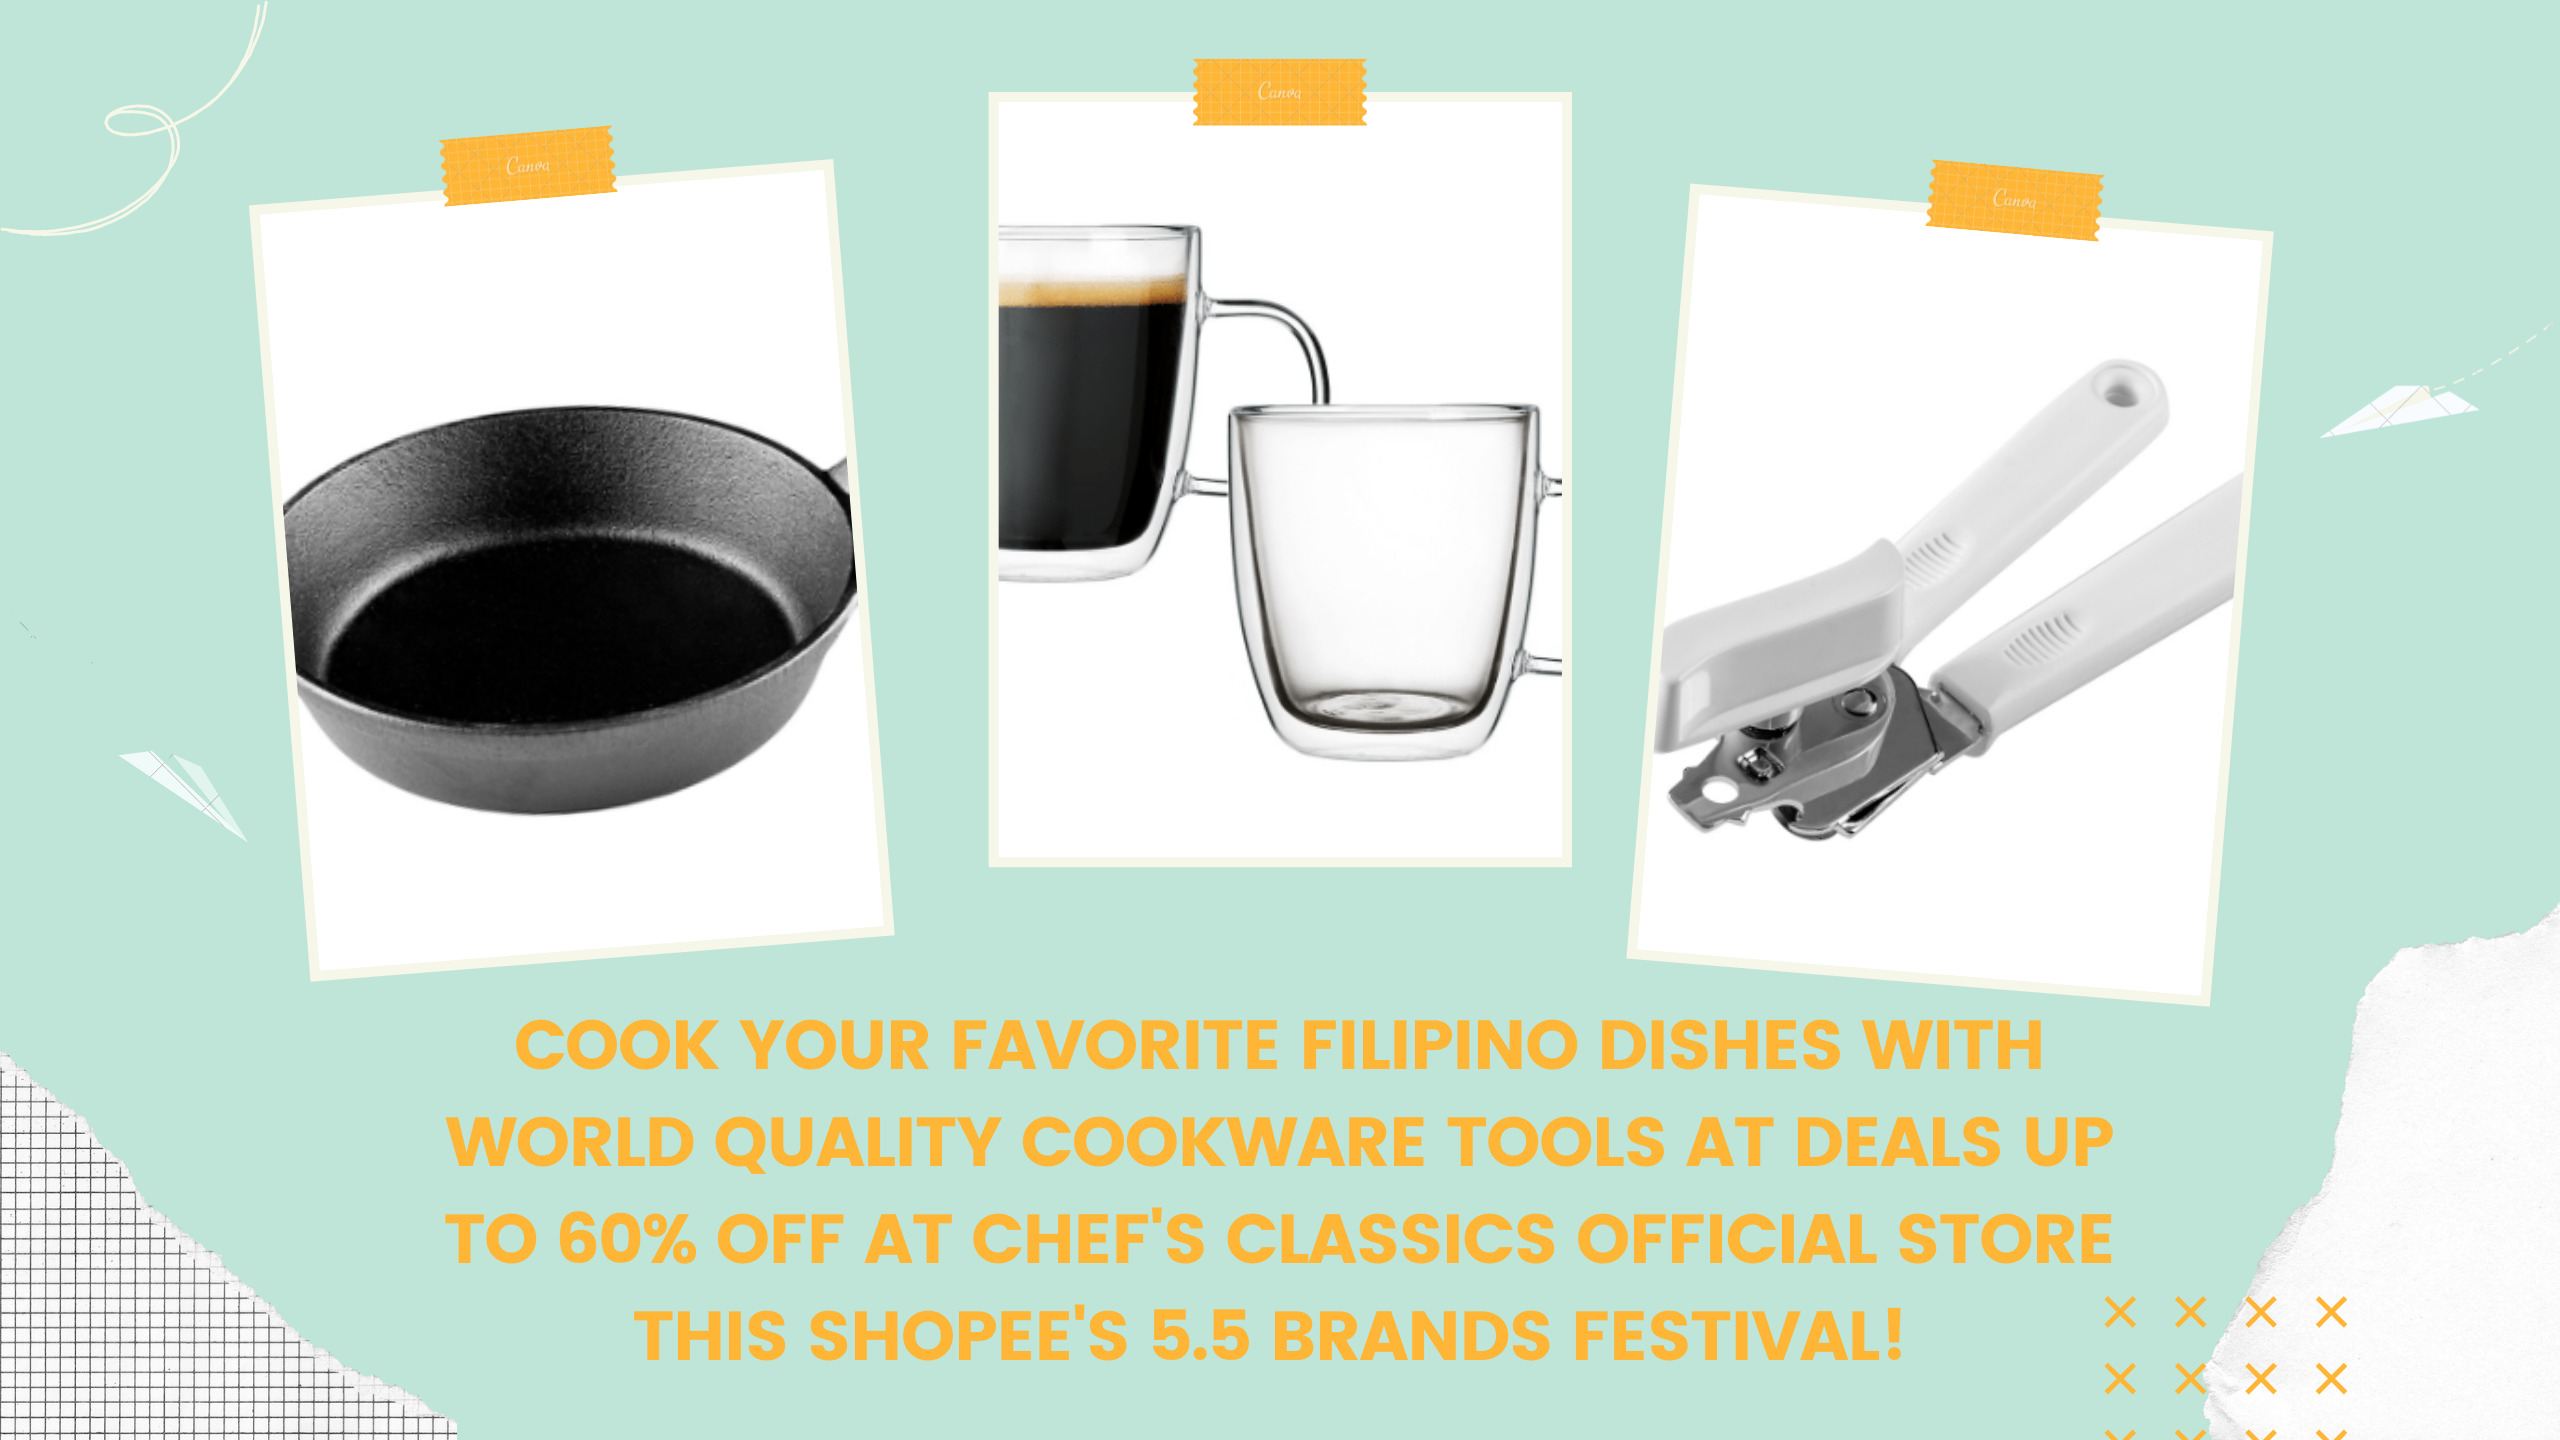 cook-your-favorite-filipino-dishes-with-world-quality-cookware-tools-chefs-classics